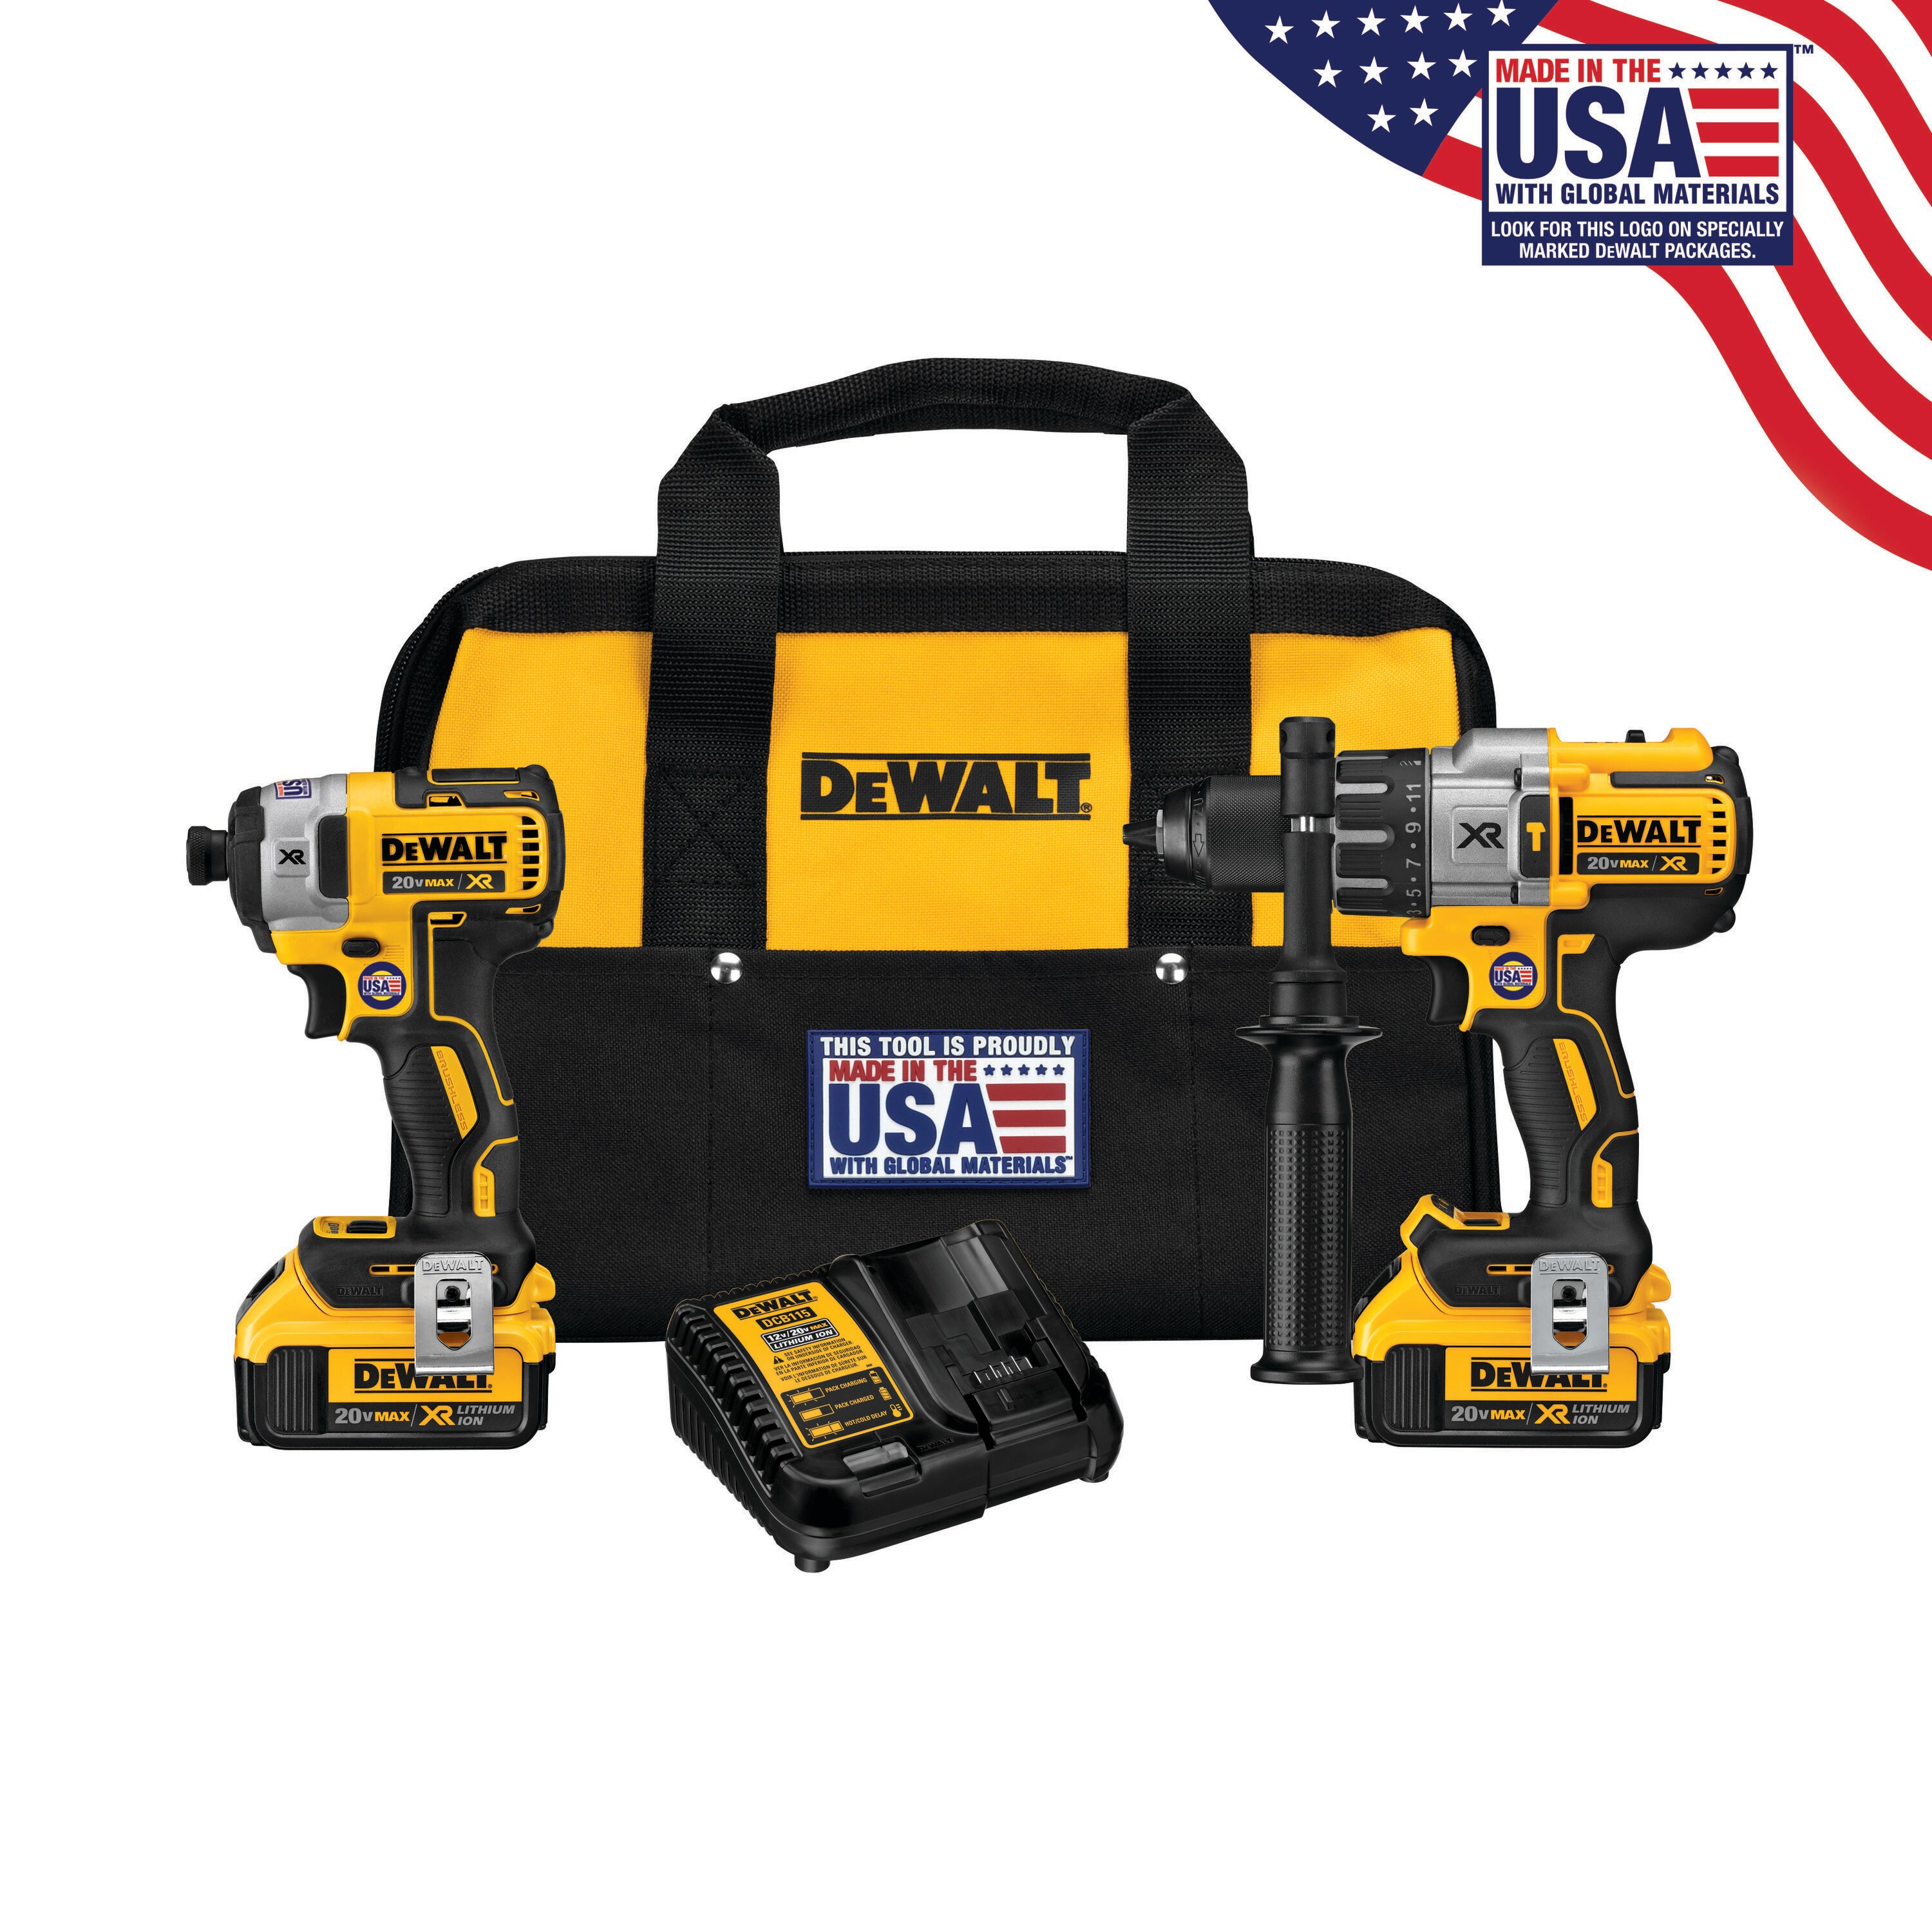  DEWALT 20V MAX XR Drill/Driver, Brushless, 3 Speed, Tool Only  (DCD991B) : Tools & Home Improvement